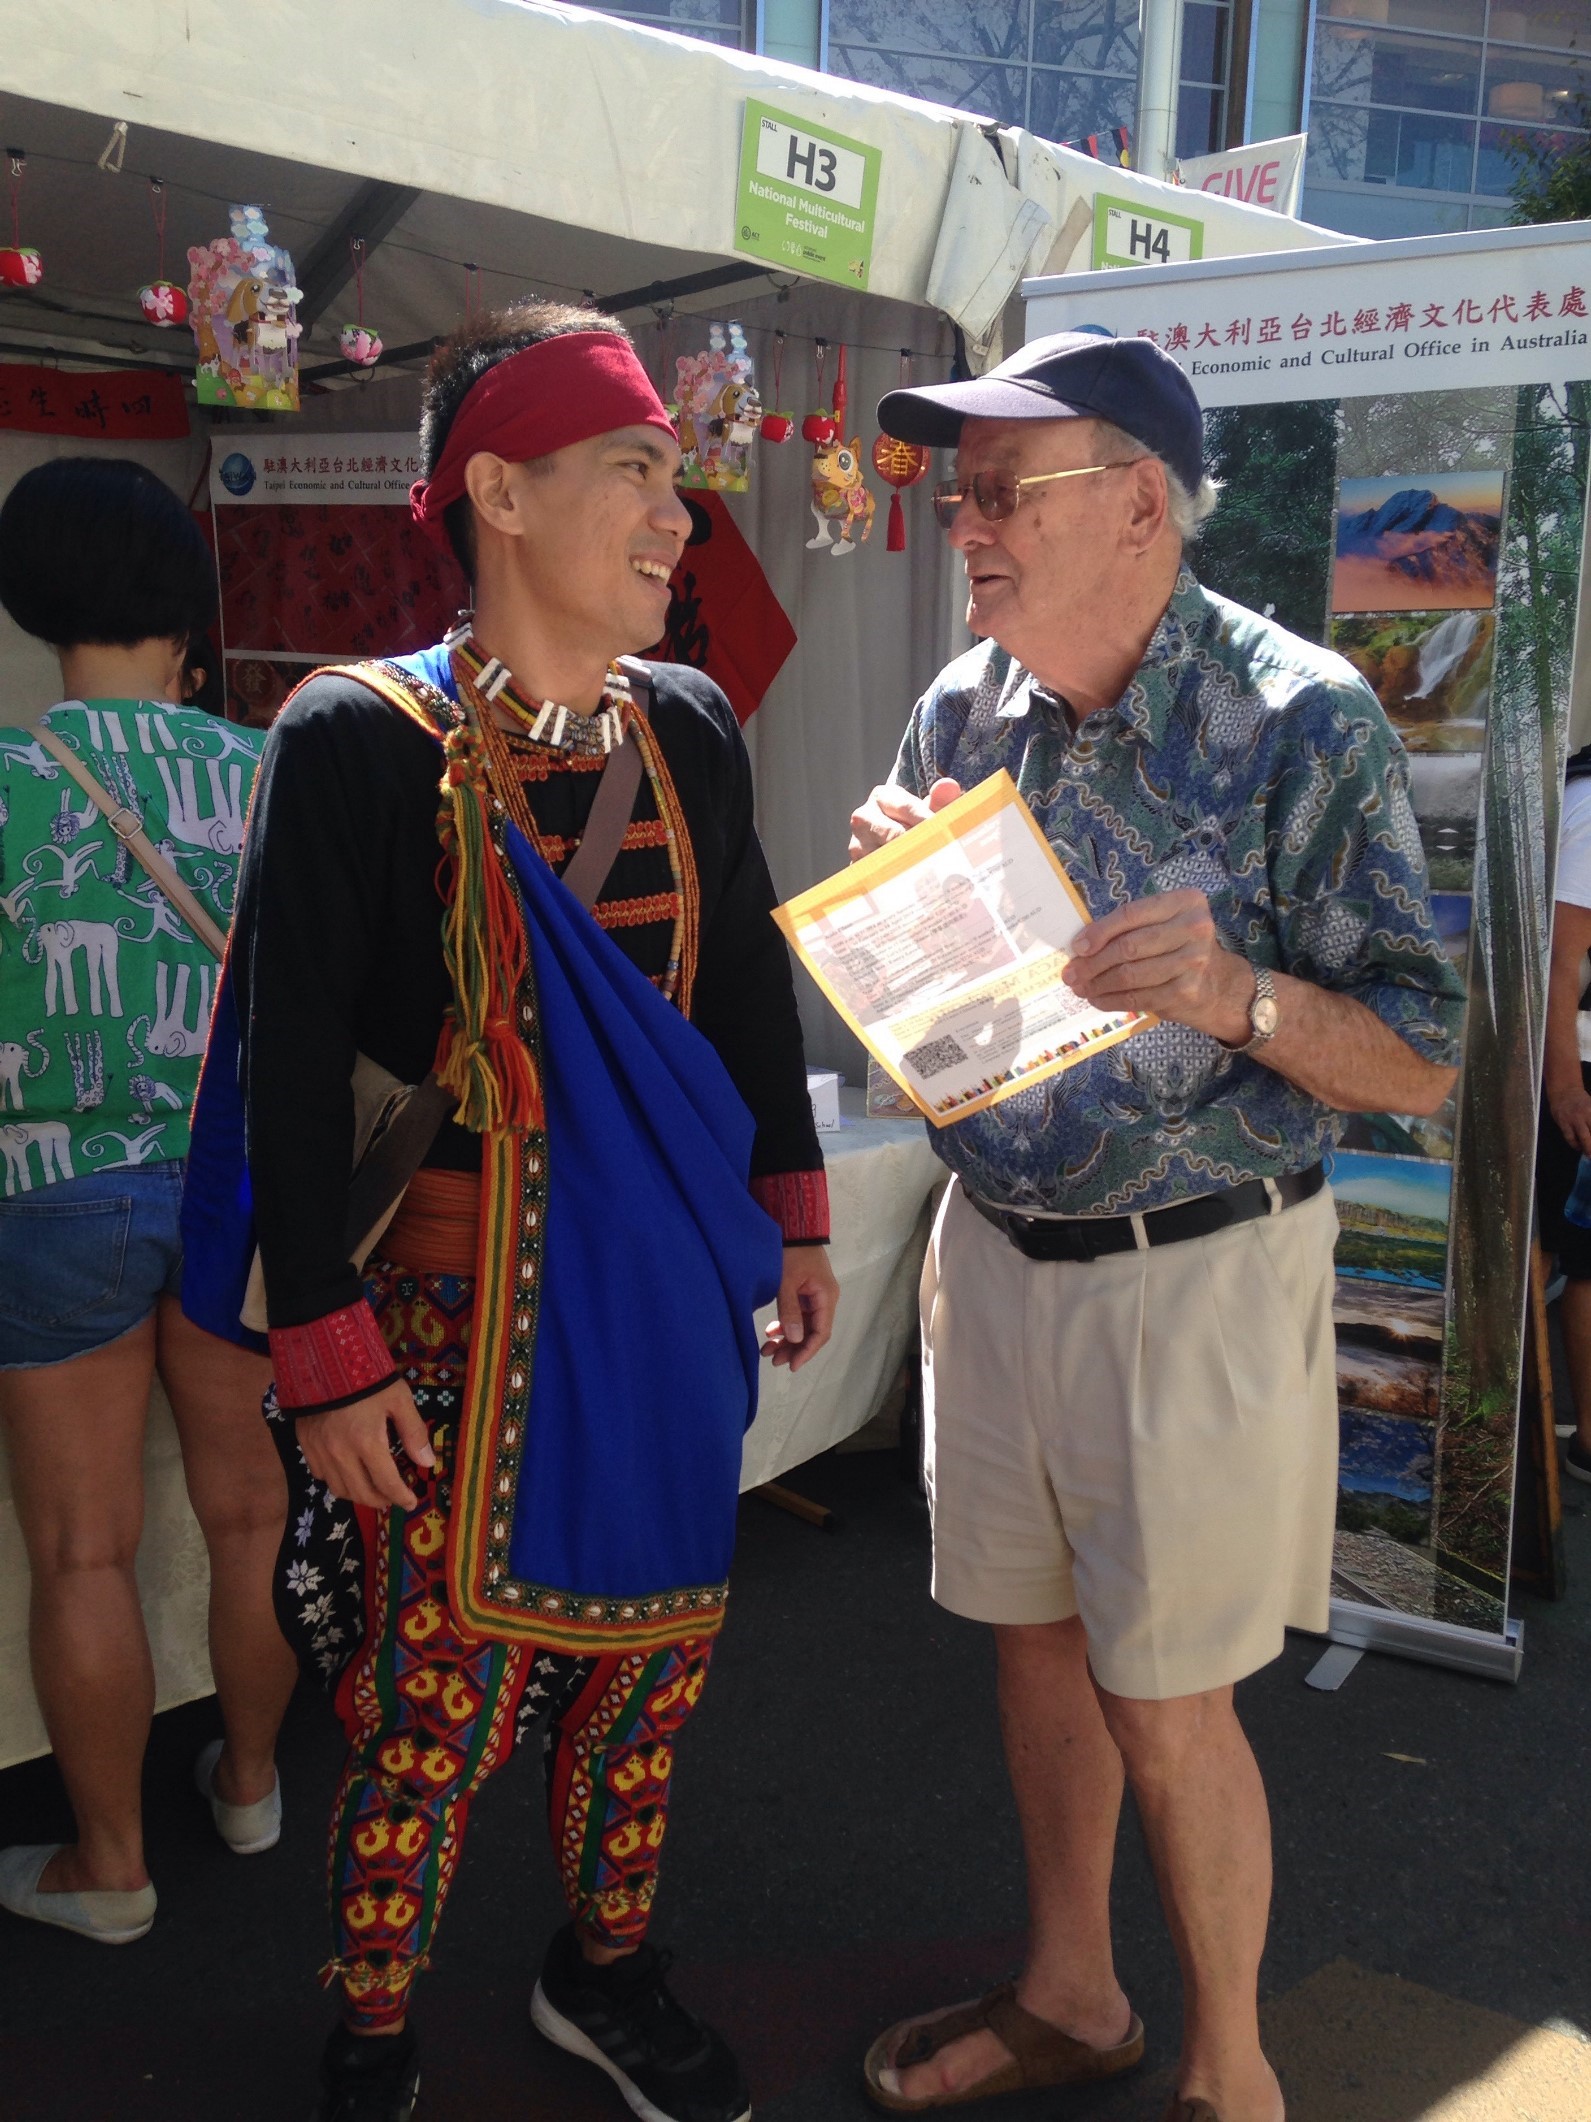 Promoting Mandarin-on-the-Go in Taiwan at Canberra’s 2018 National Multicultural Festival